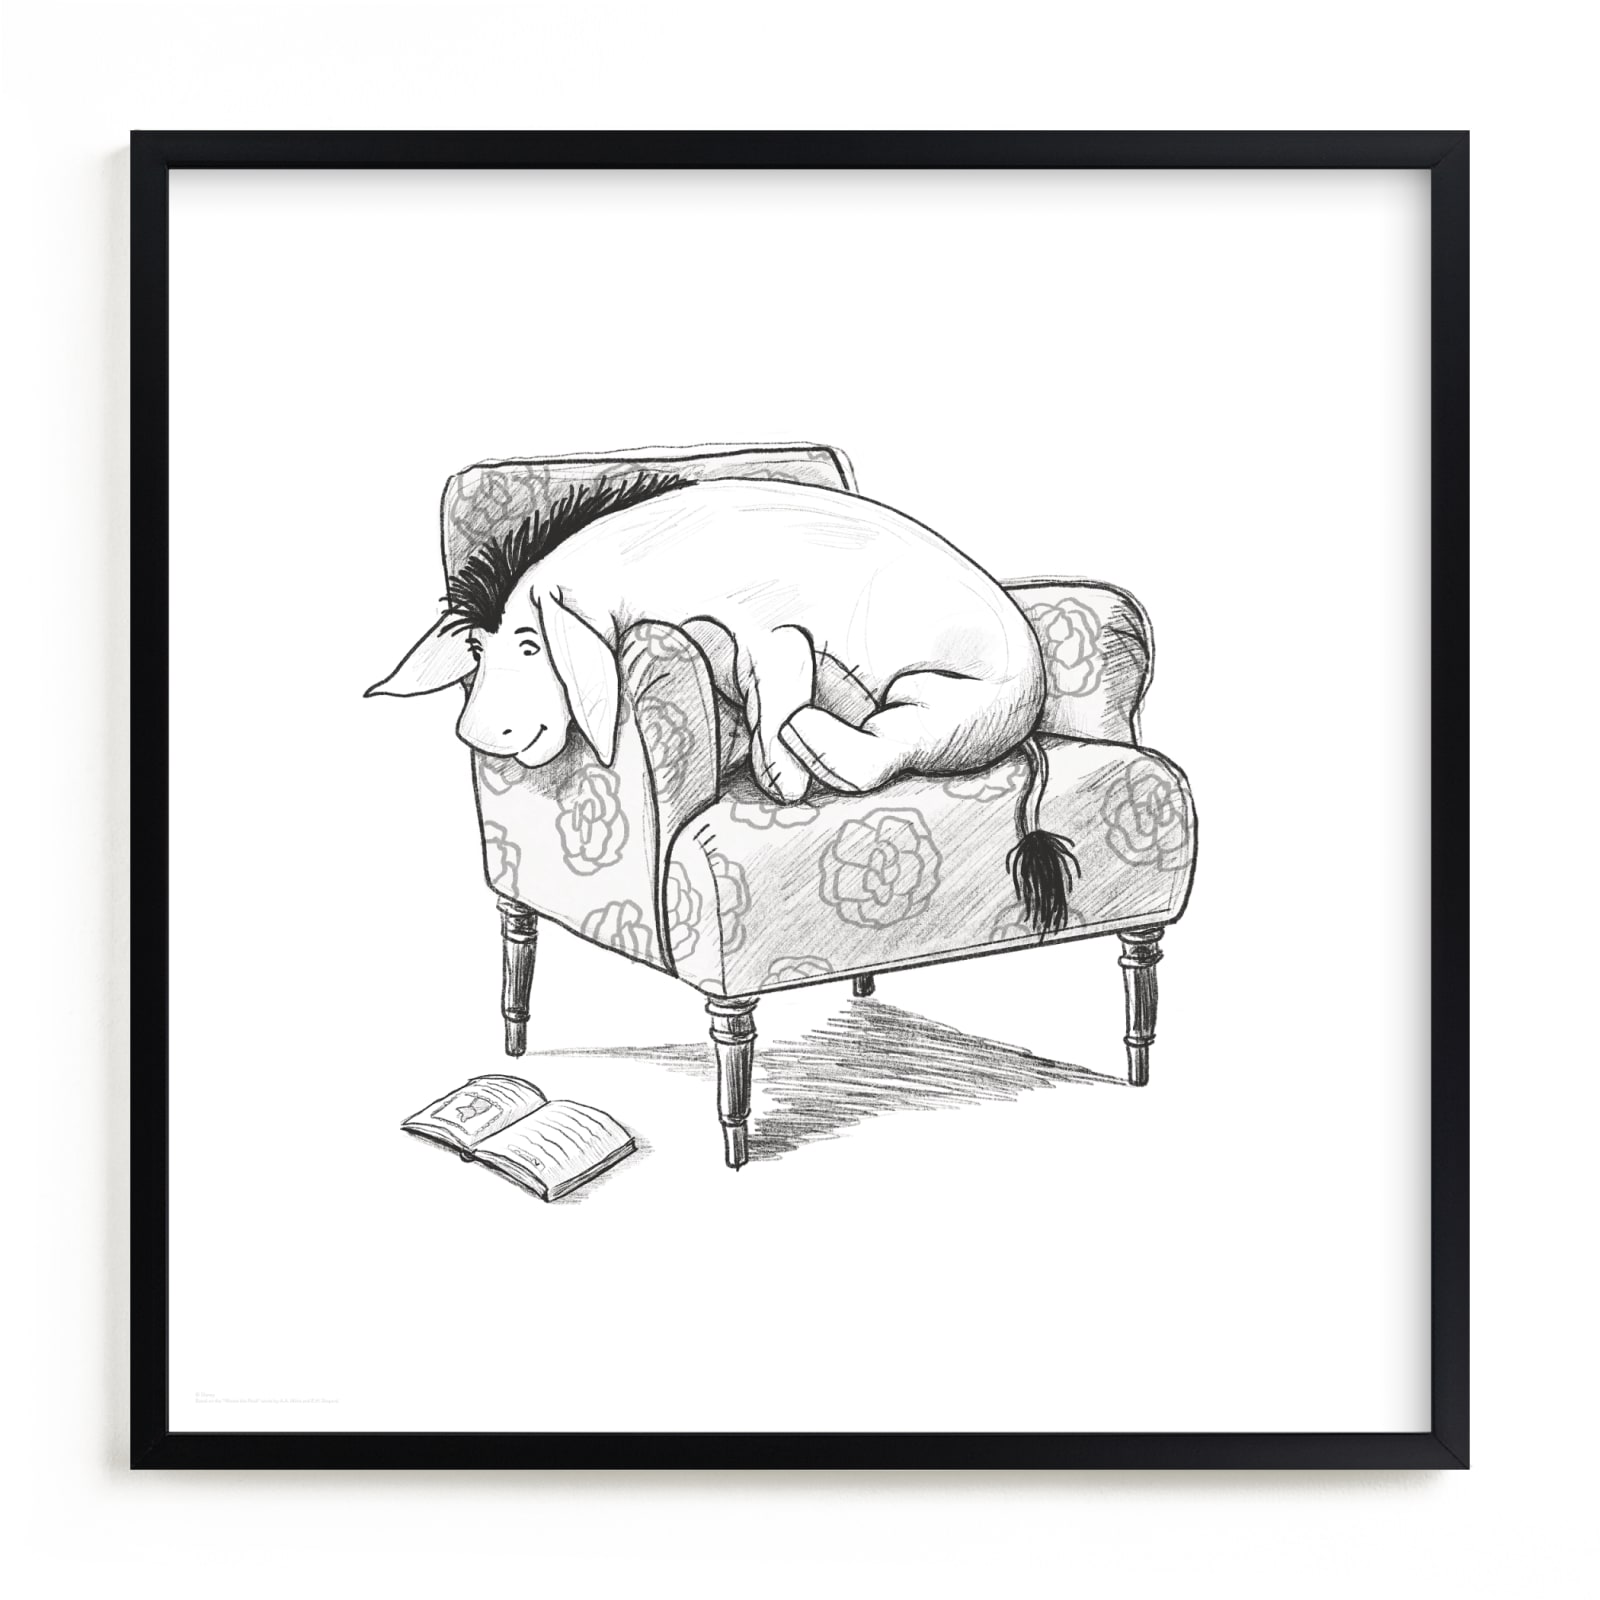 This is a black and white disney art by Stefanie Lane called Eeyore Lounging | Winnie The Pooh.